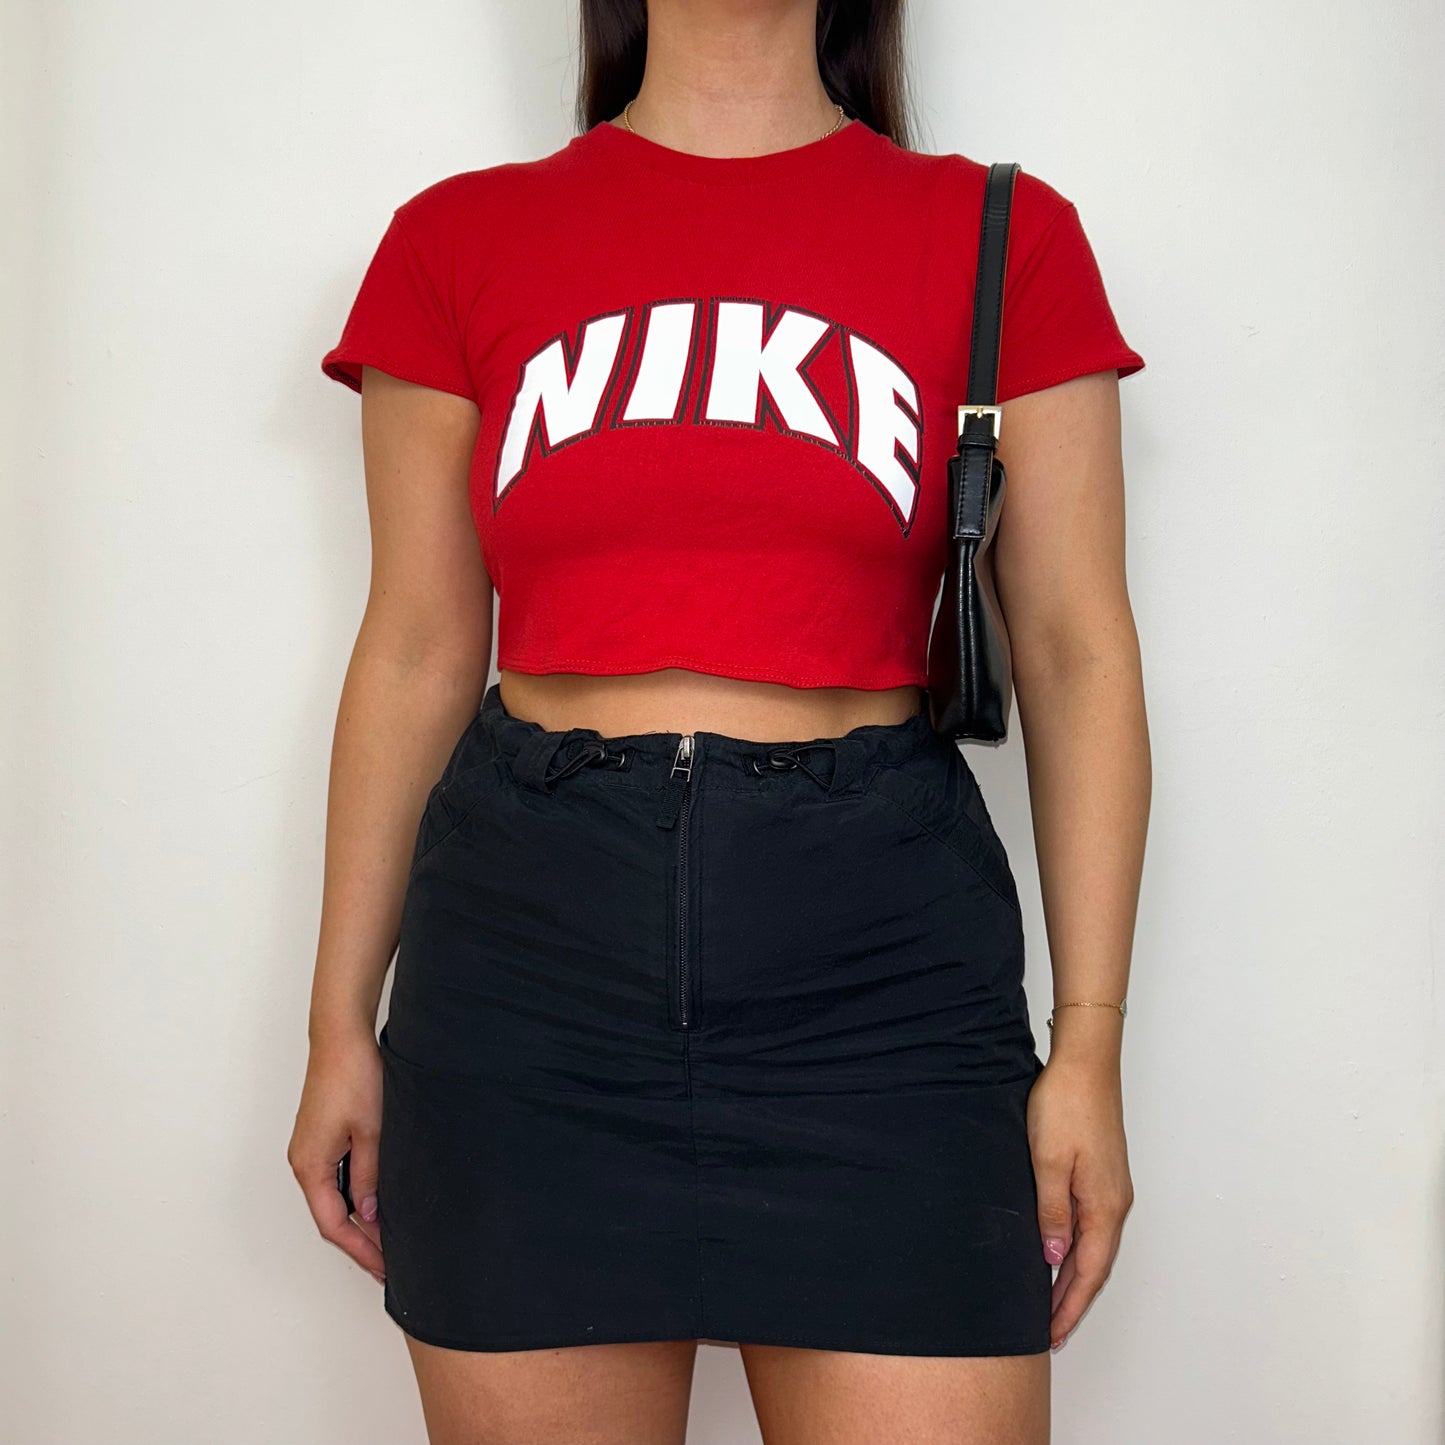 red short sleeve crop top with white nike logo shown on a model wearing a black skirt and black shoulder bag